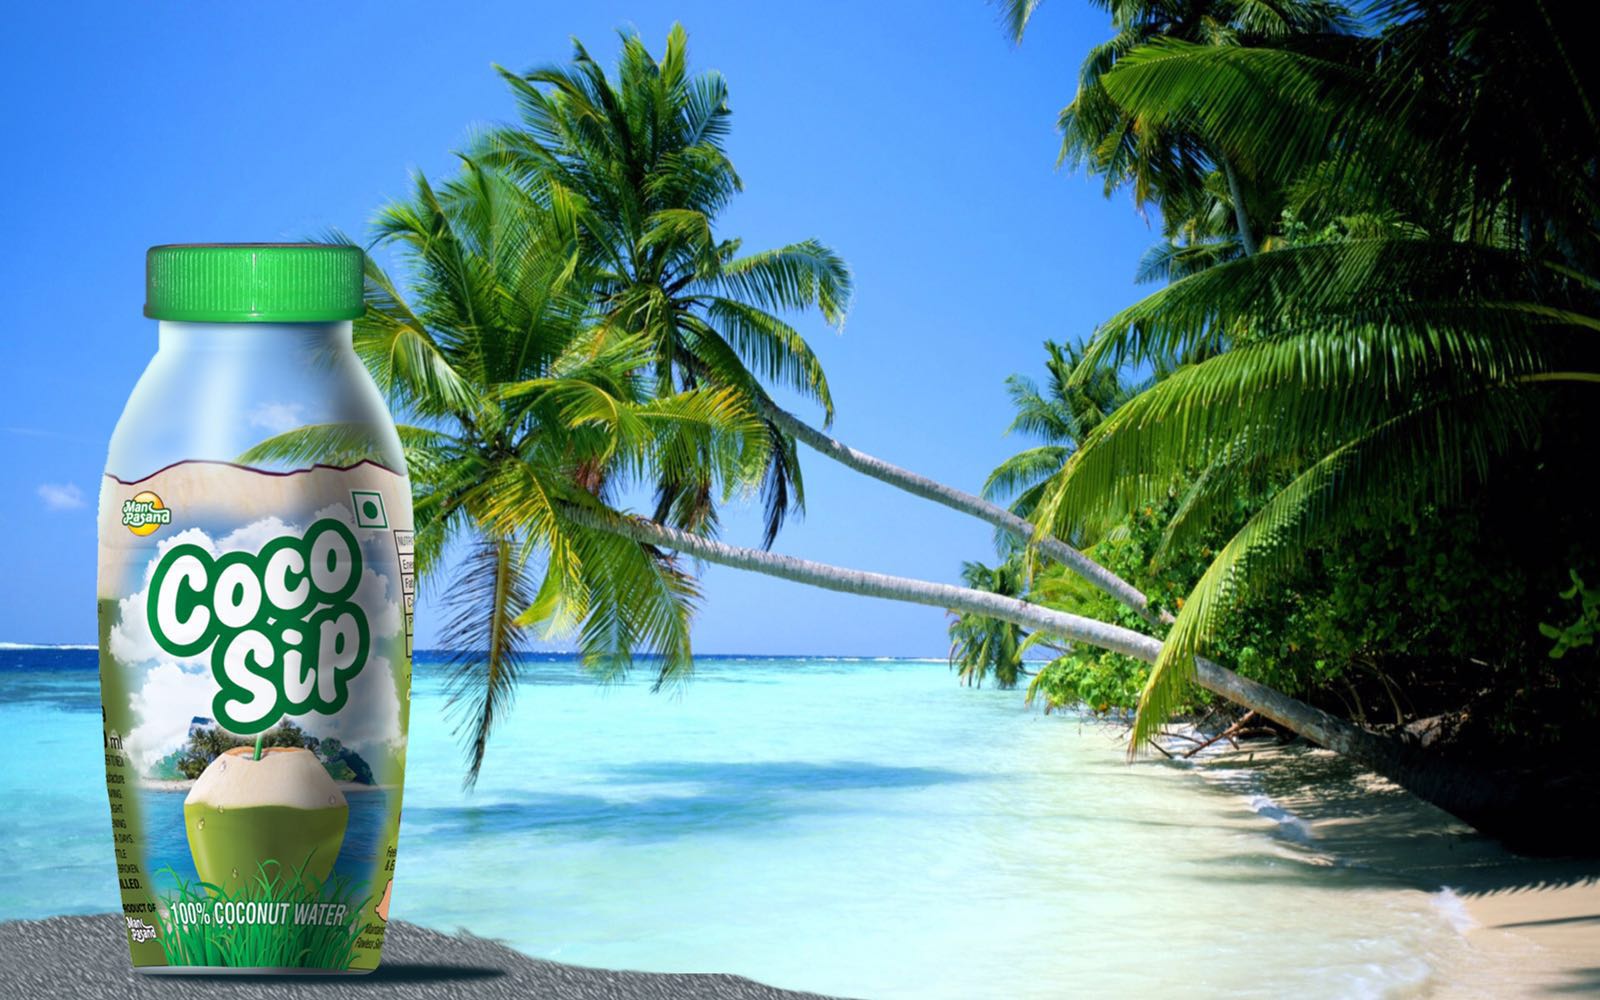 Packaged tender coconut water under ‘Coco Sip’ brand name